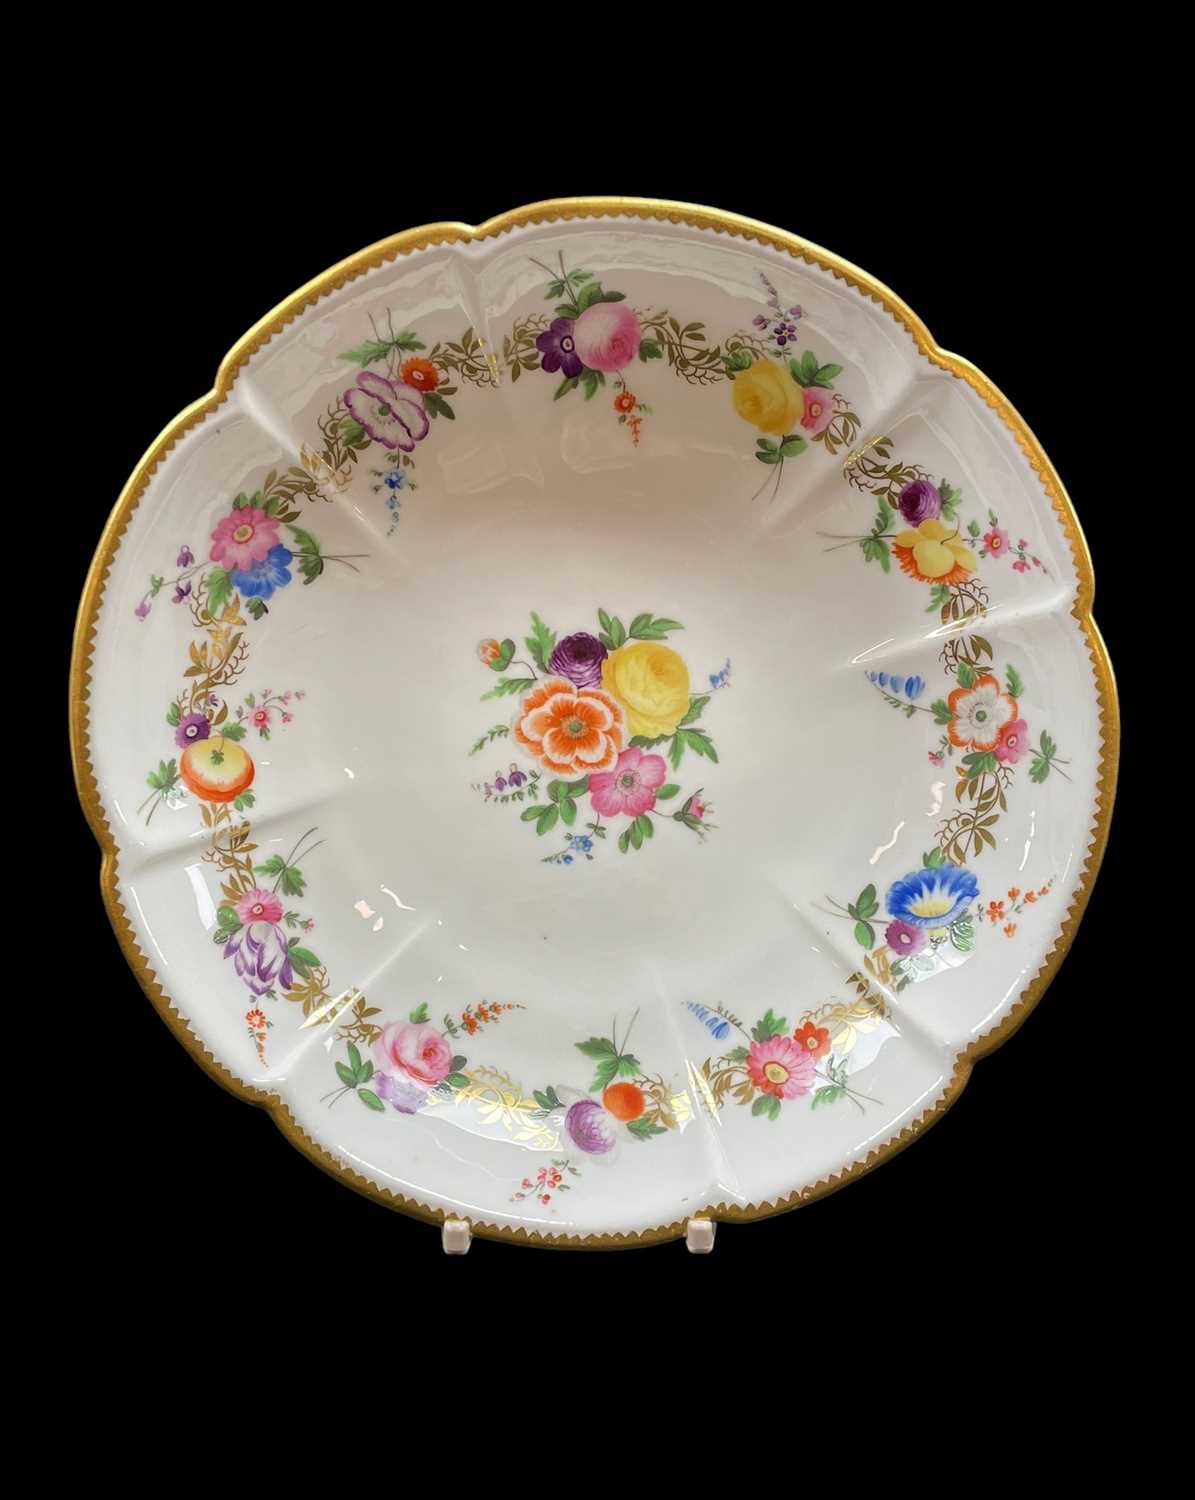 NANTGARW PORCELAIN CRUCIFORM DISH circa 1818-1820, the border decorated with a series of flower